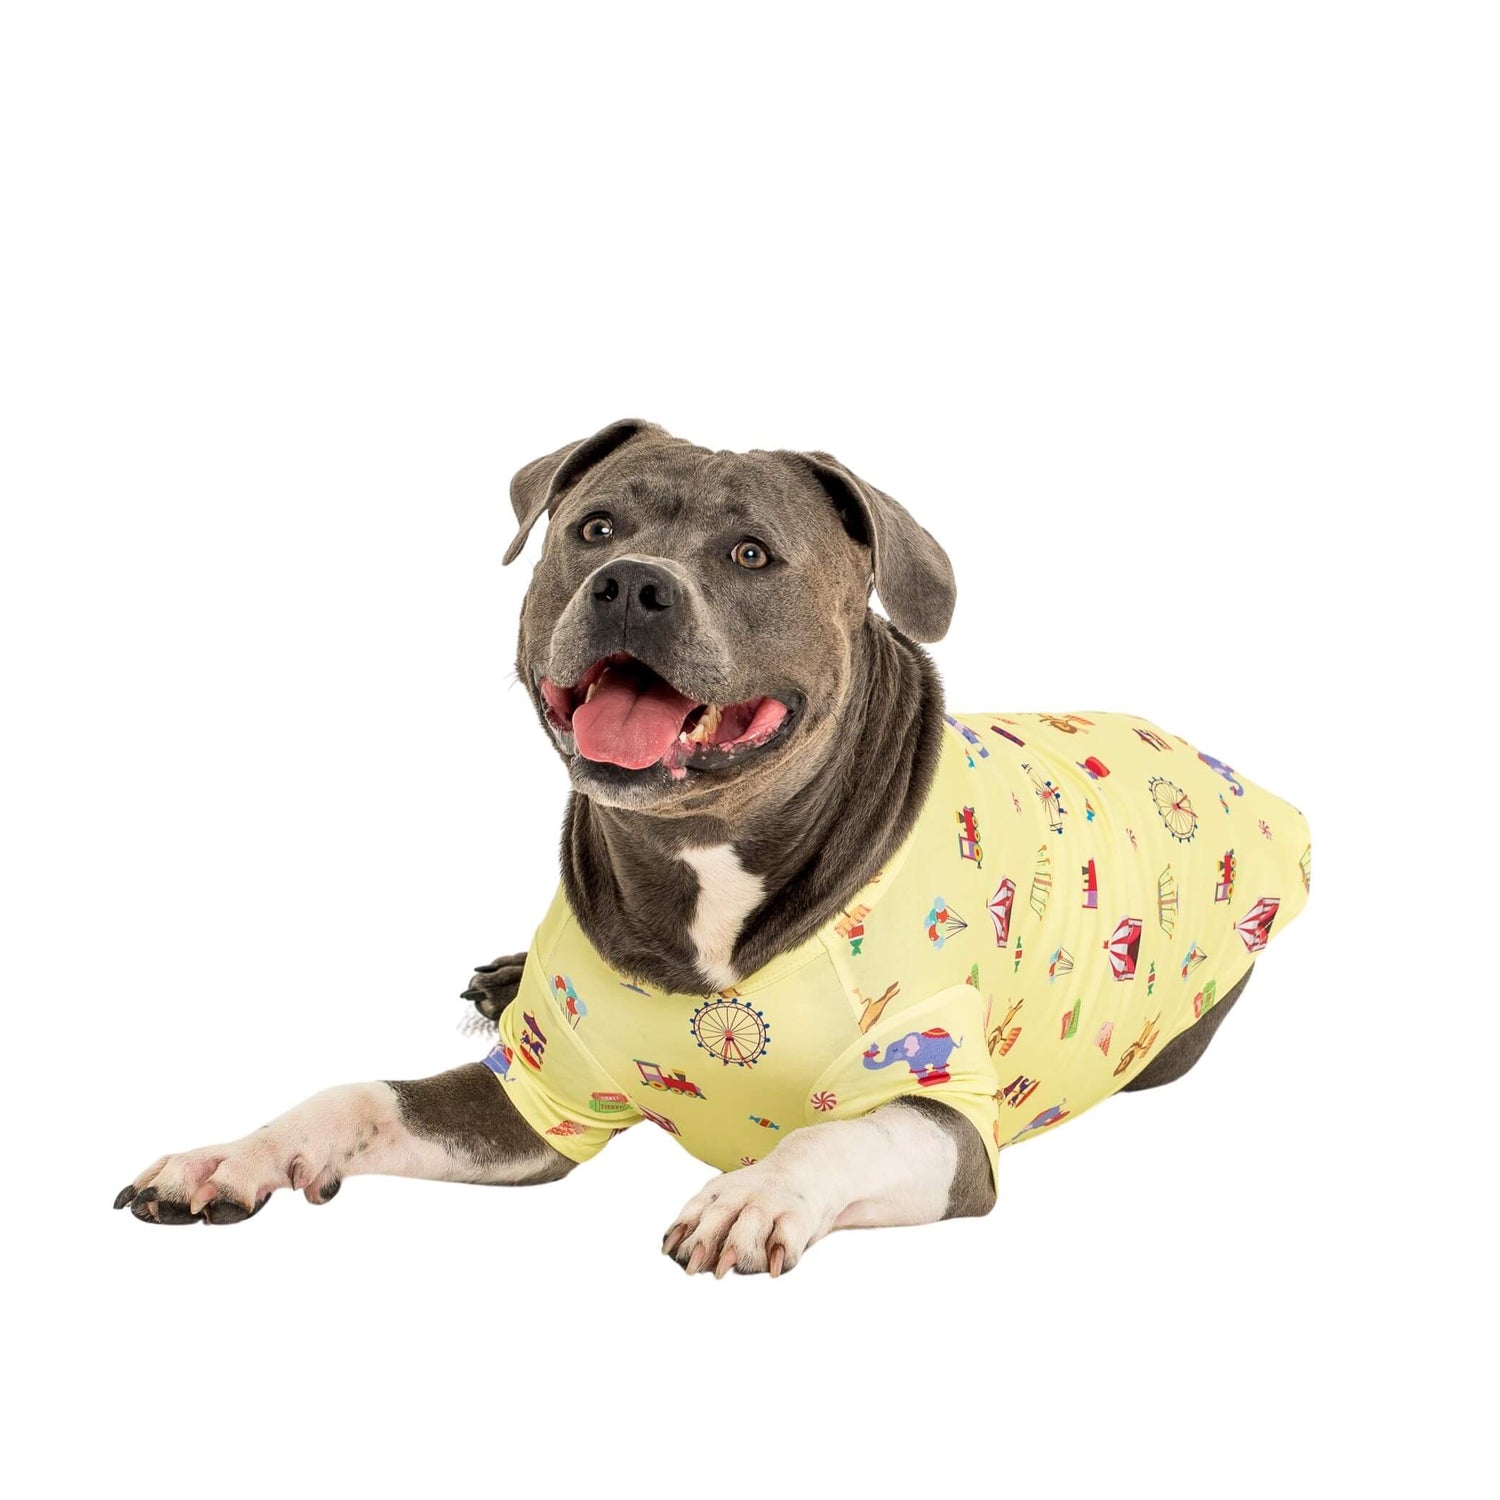 Luger the Staffy laying down wearing a Vibrant Hound Admit one dog shirt. It has carnival theme printed on the dog clothing.